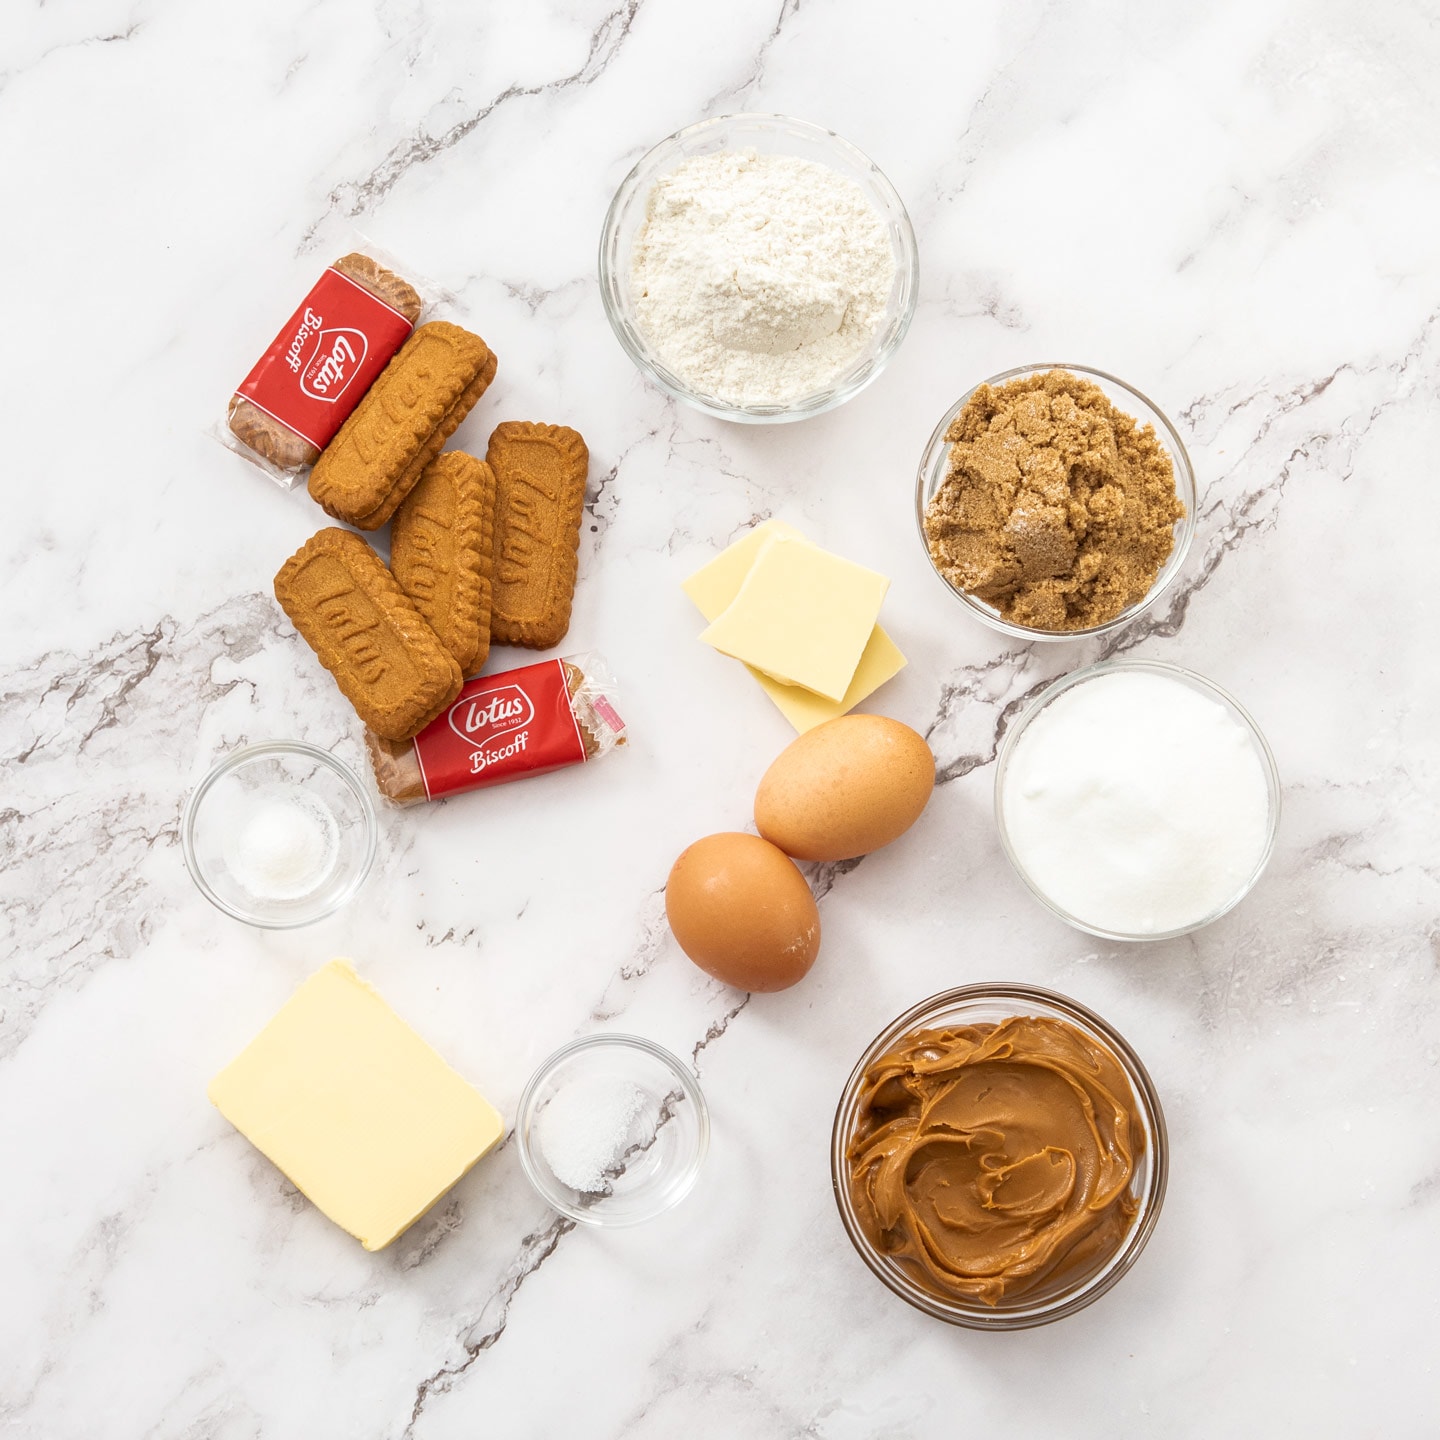 Ingredients for Biscoff blondies on a marble surface.